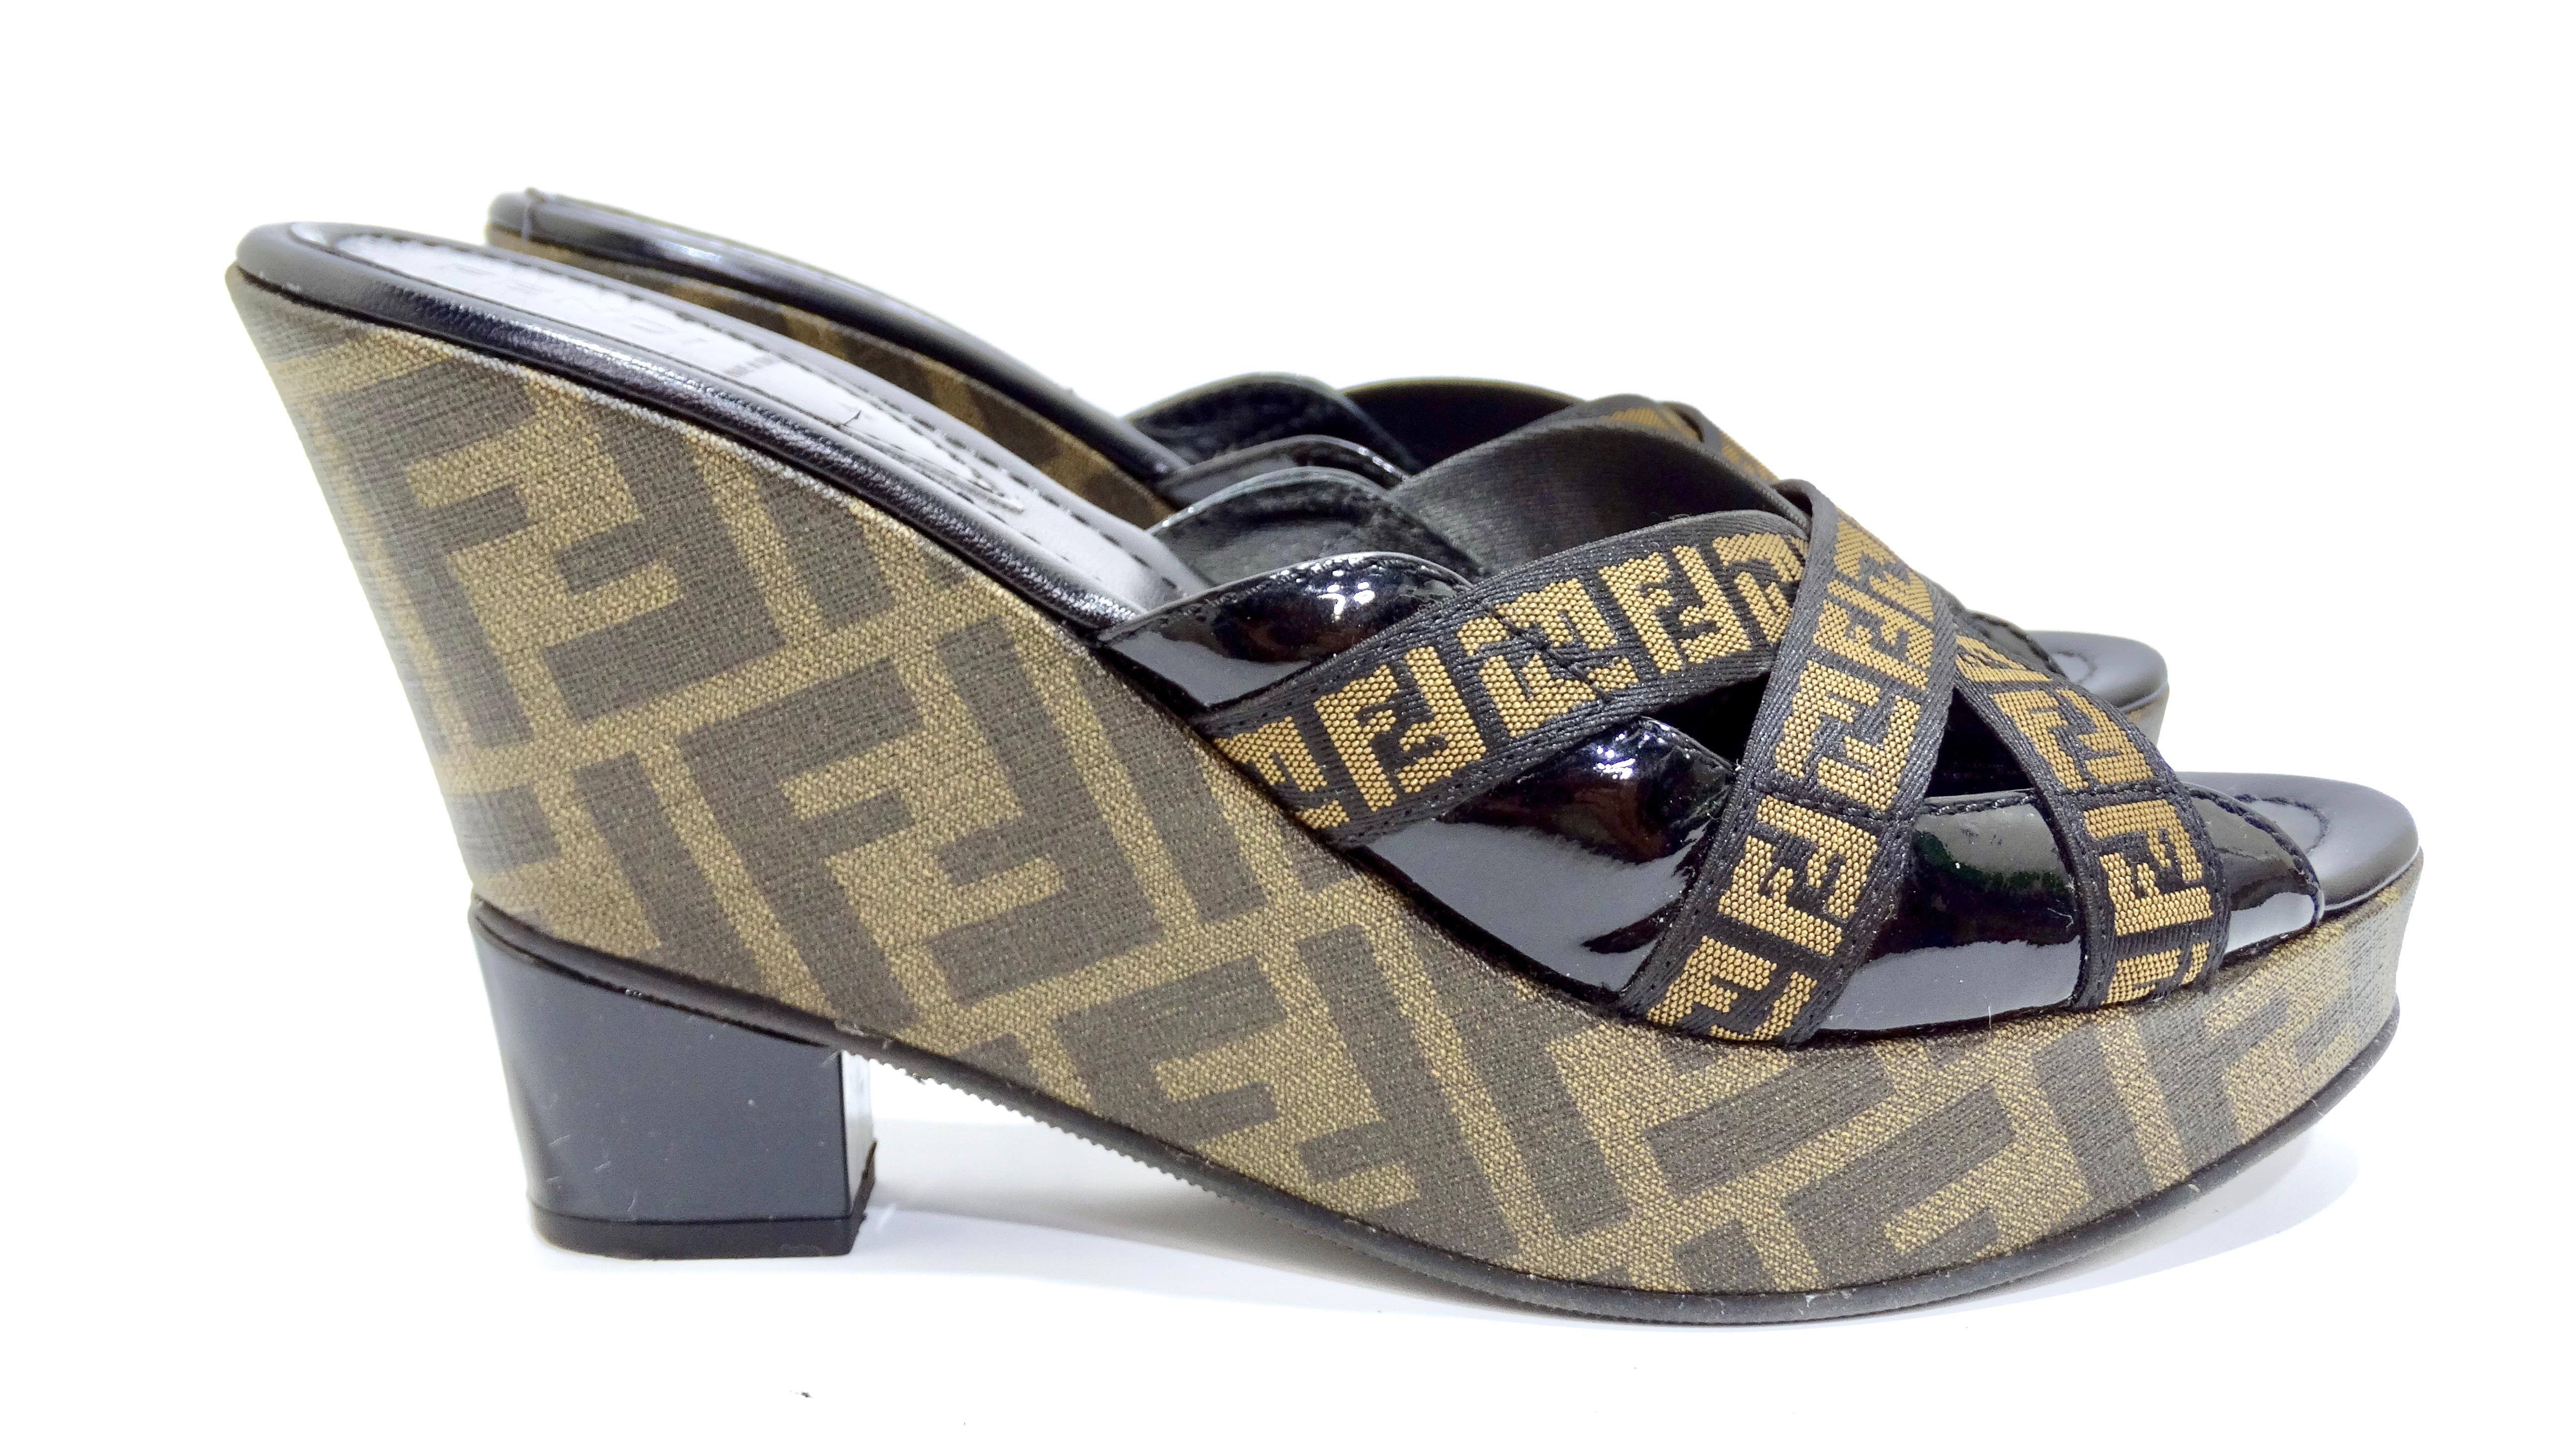 Fendi 1990's Zucca FF Logo Wedged Mules In Excellent Condition For Sale In Scottsdale, AZ